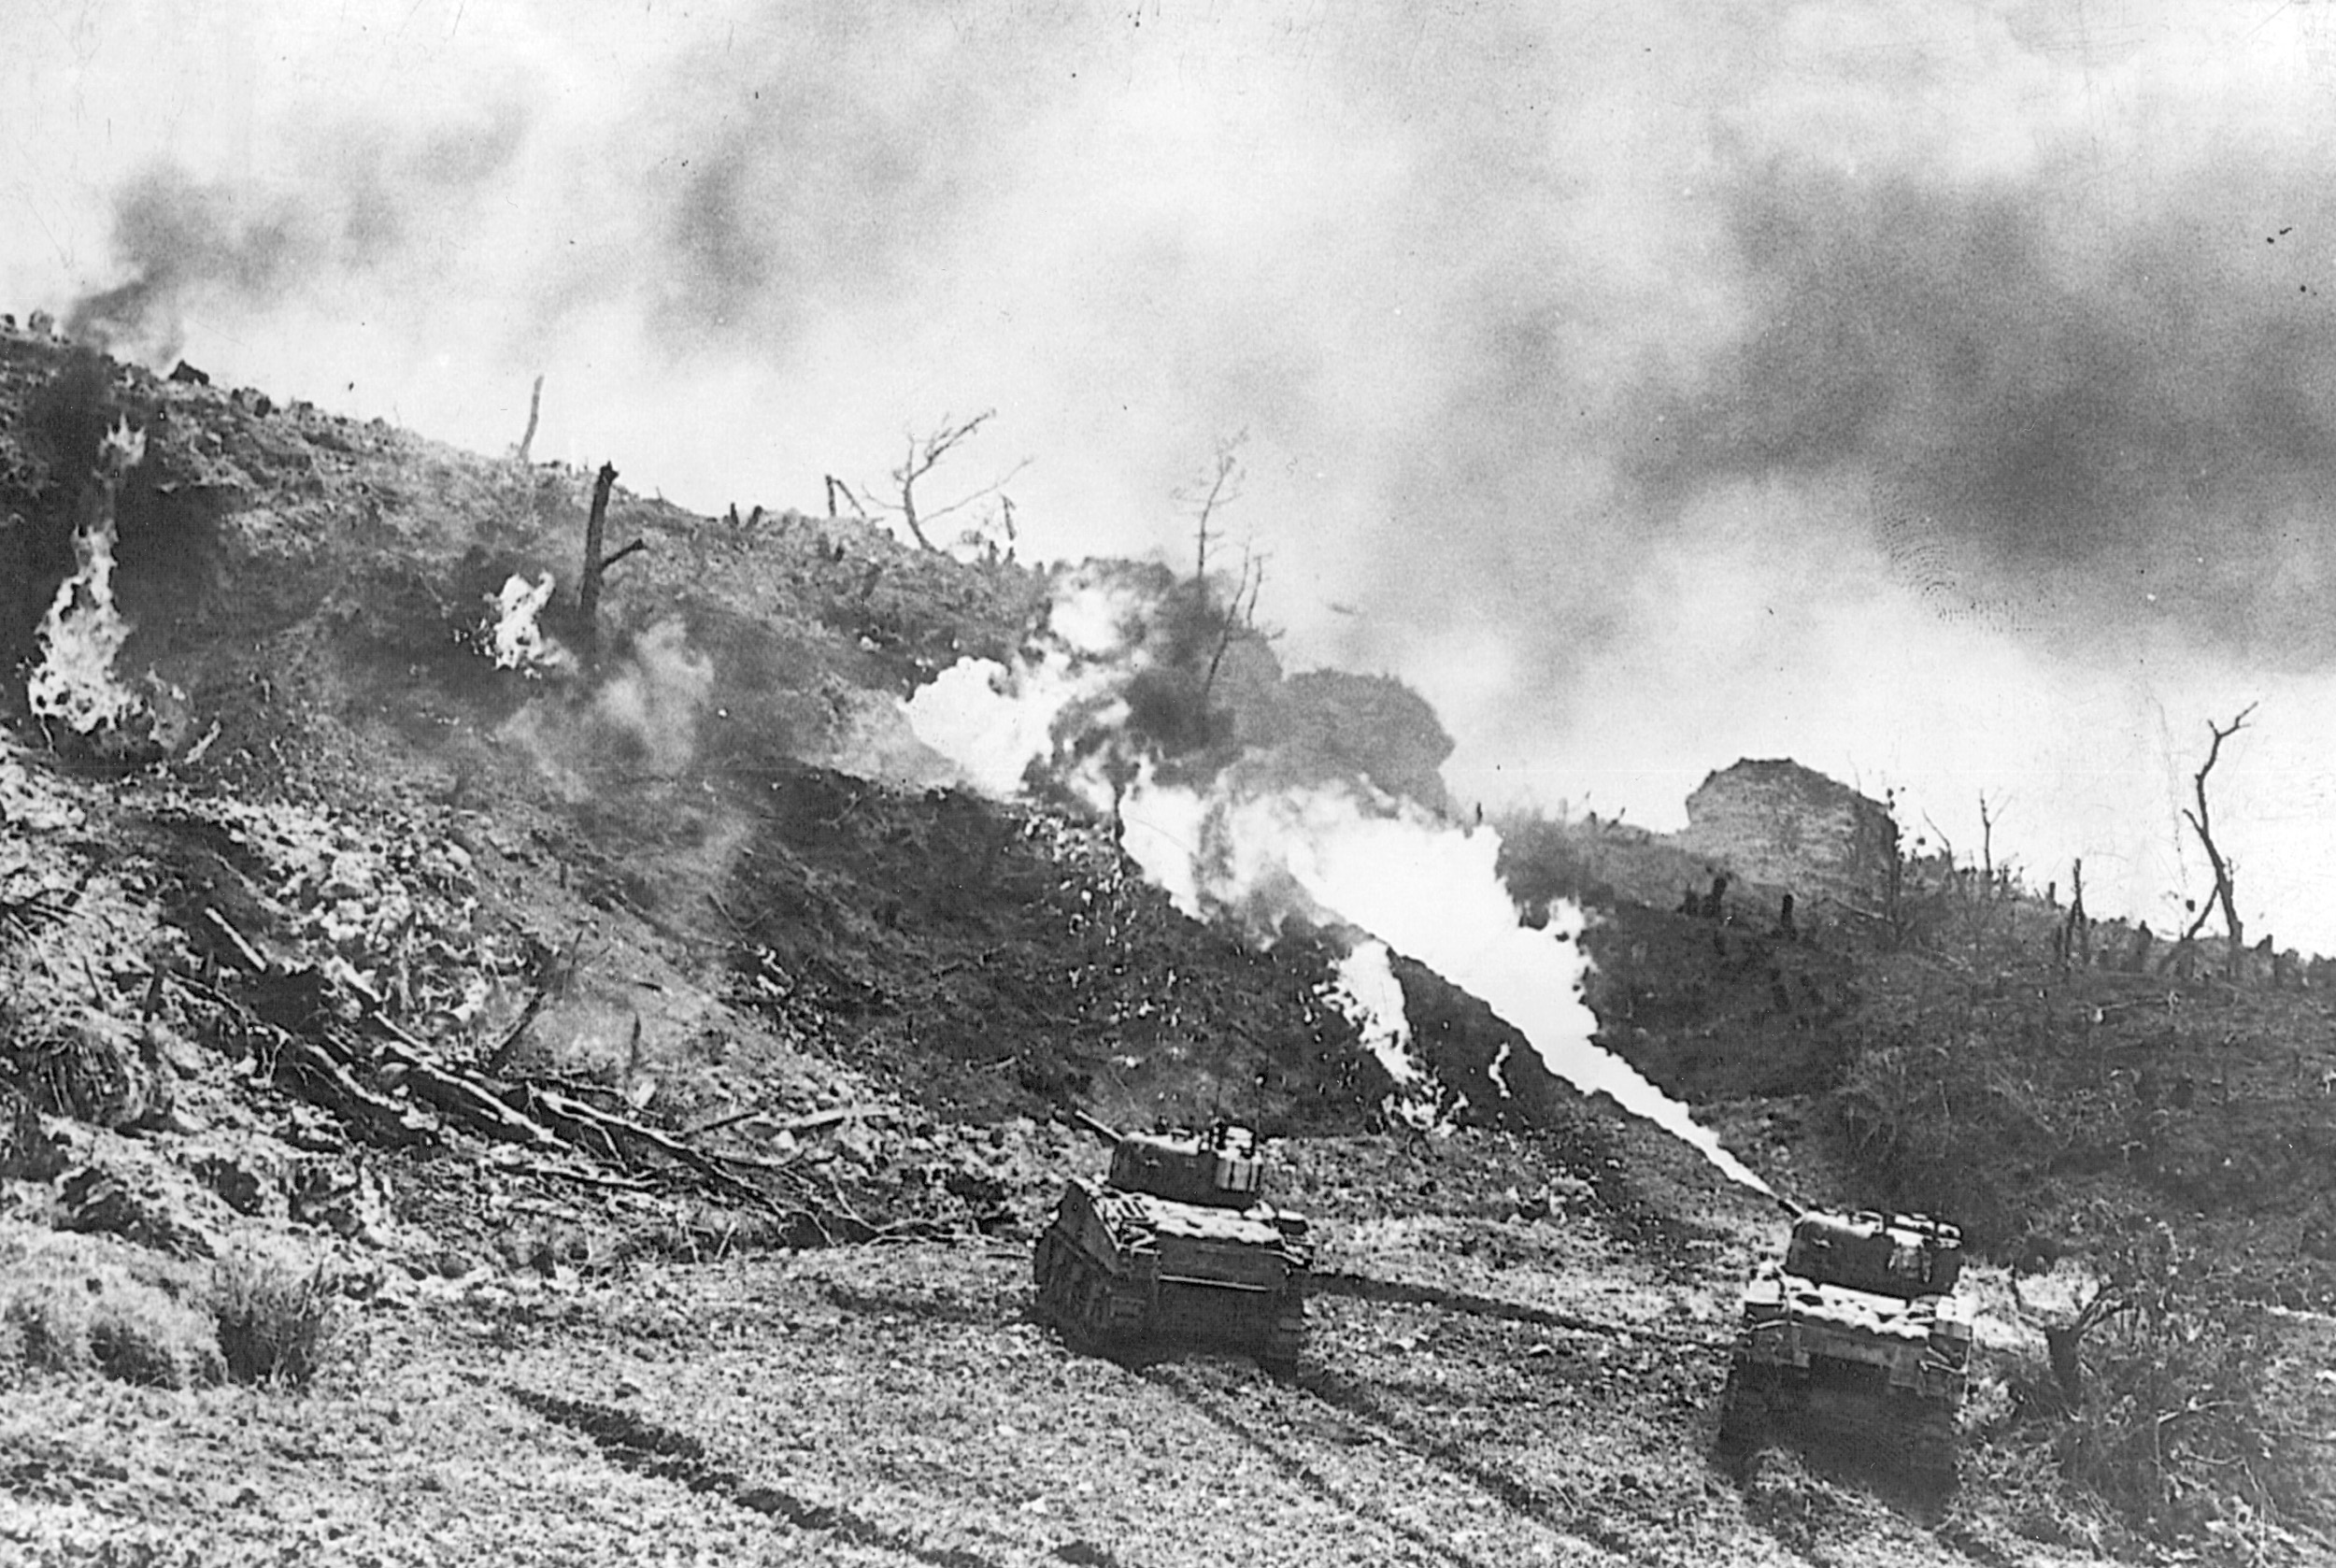 Tanks of the 7th Infantry Division, equipped with flamethrowers, spew fire into the openings of Japanese pillboxes and bunkers. The Japanese often fought to the death, and using such weapons was sometimes the only way to silence their guns.  